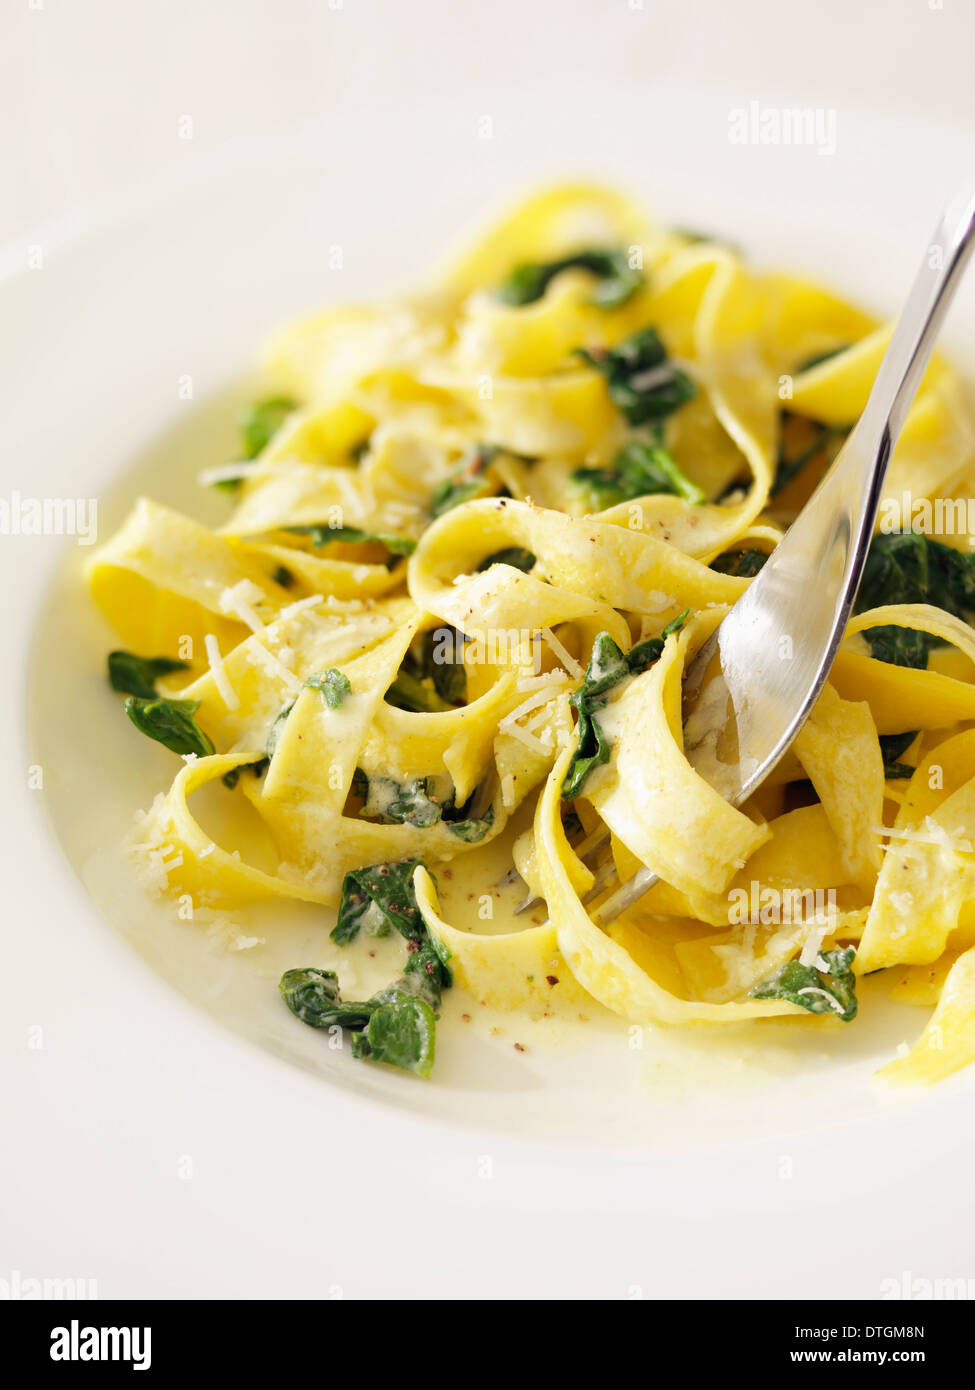 Tagliatelles with spinach and grated cheese Stock Photo